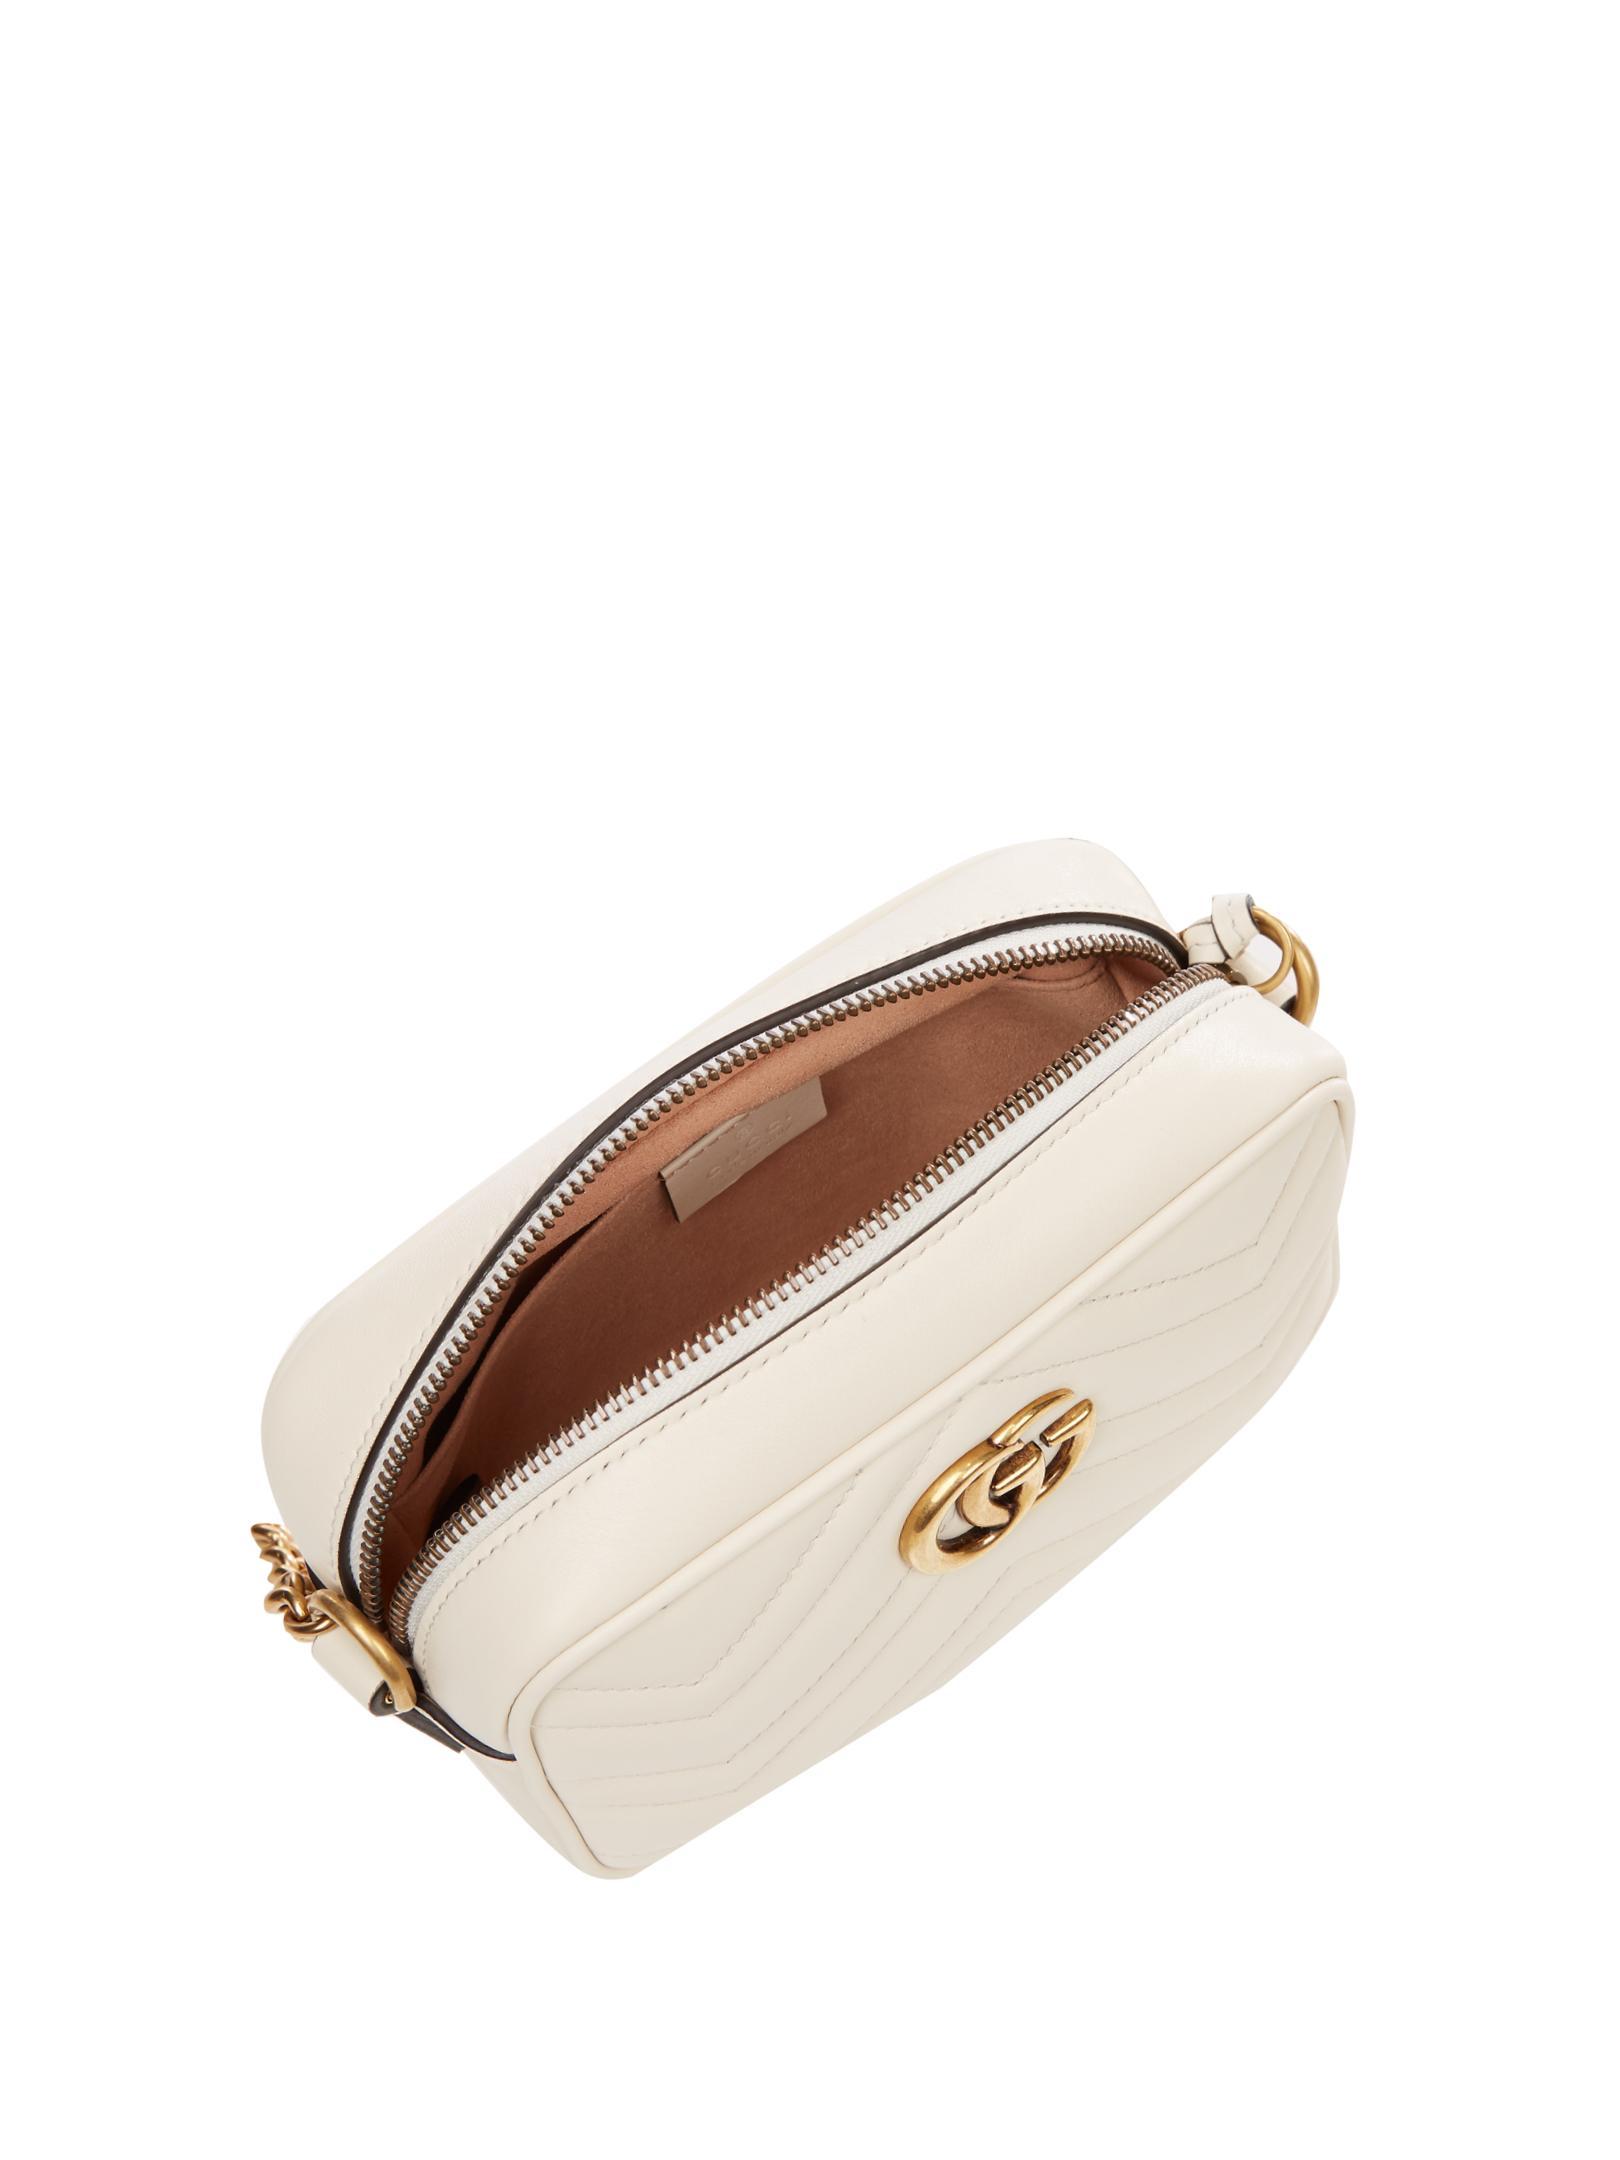 Lyst - Gucci Gg Marmont Mini Quilted-leather Cross-body Bag in White